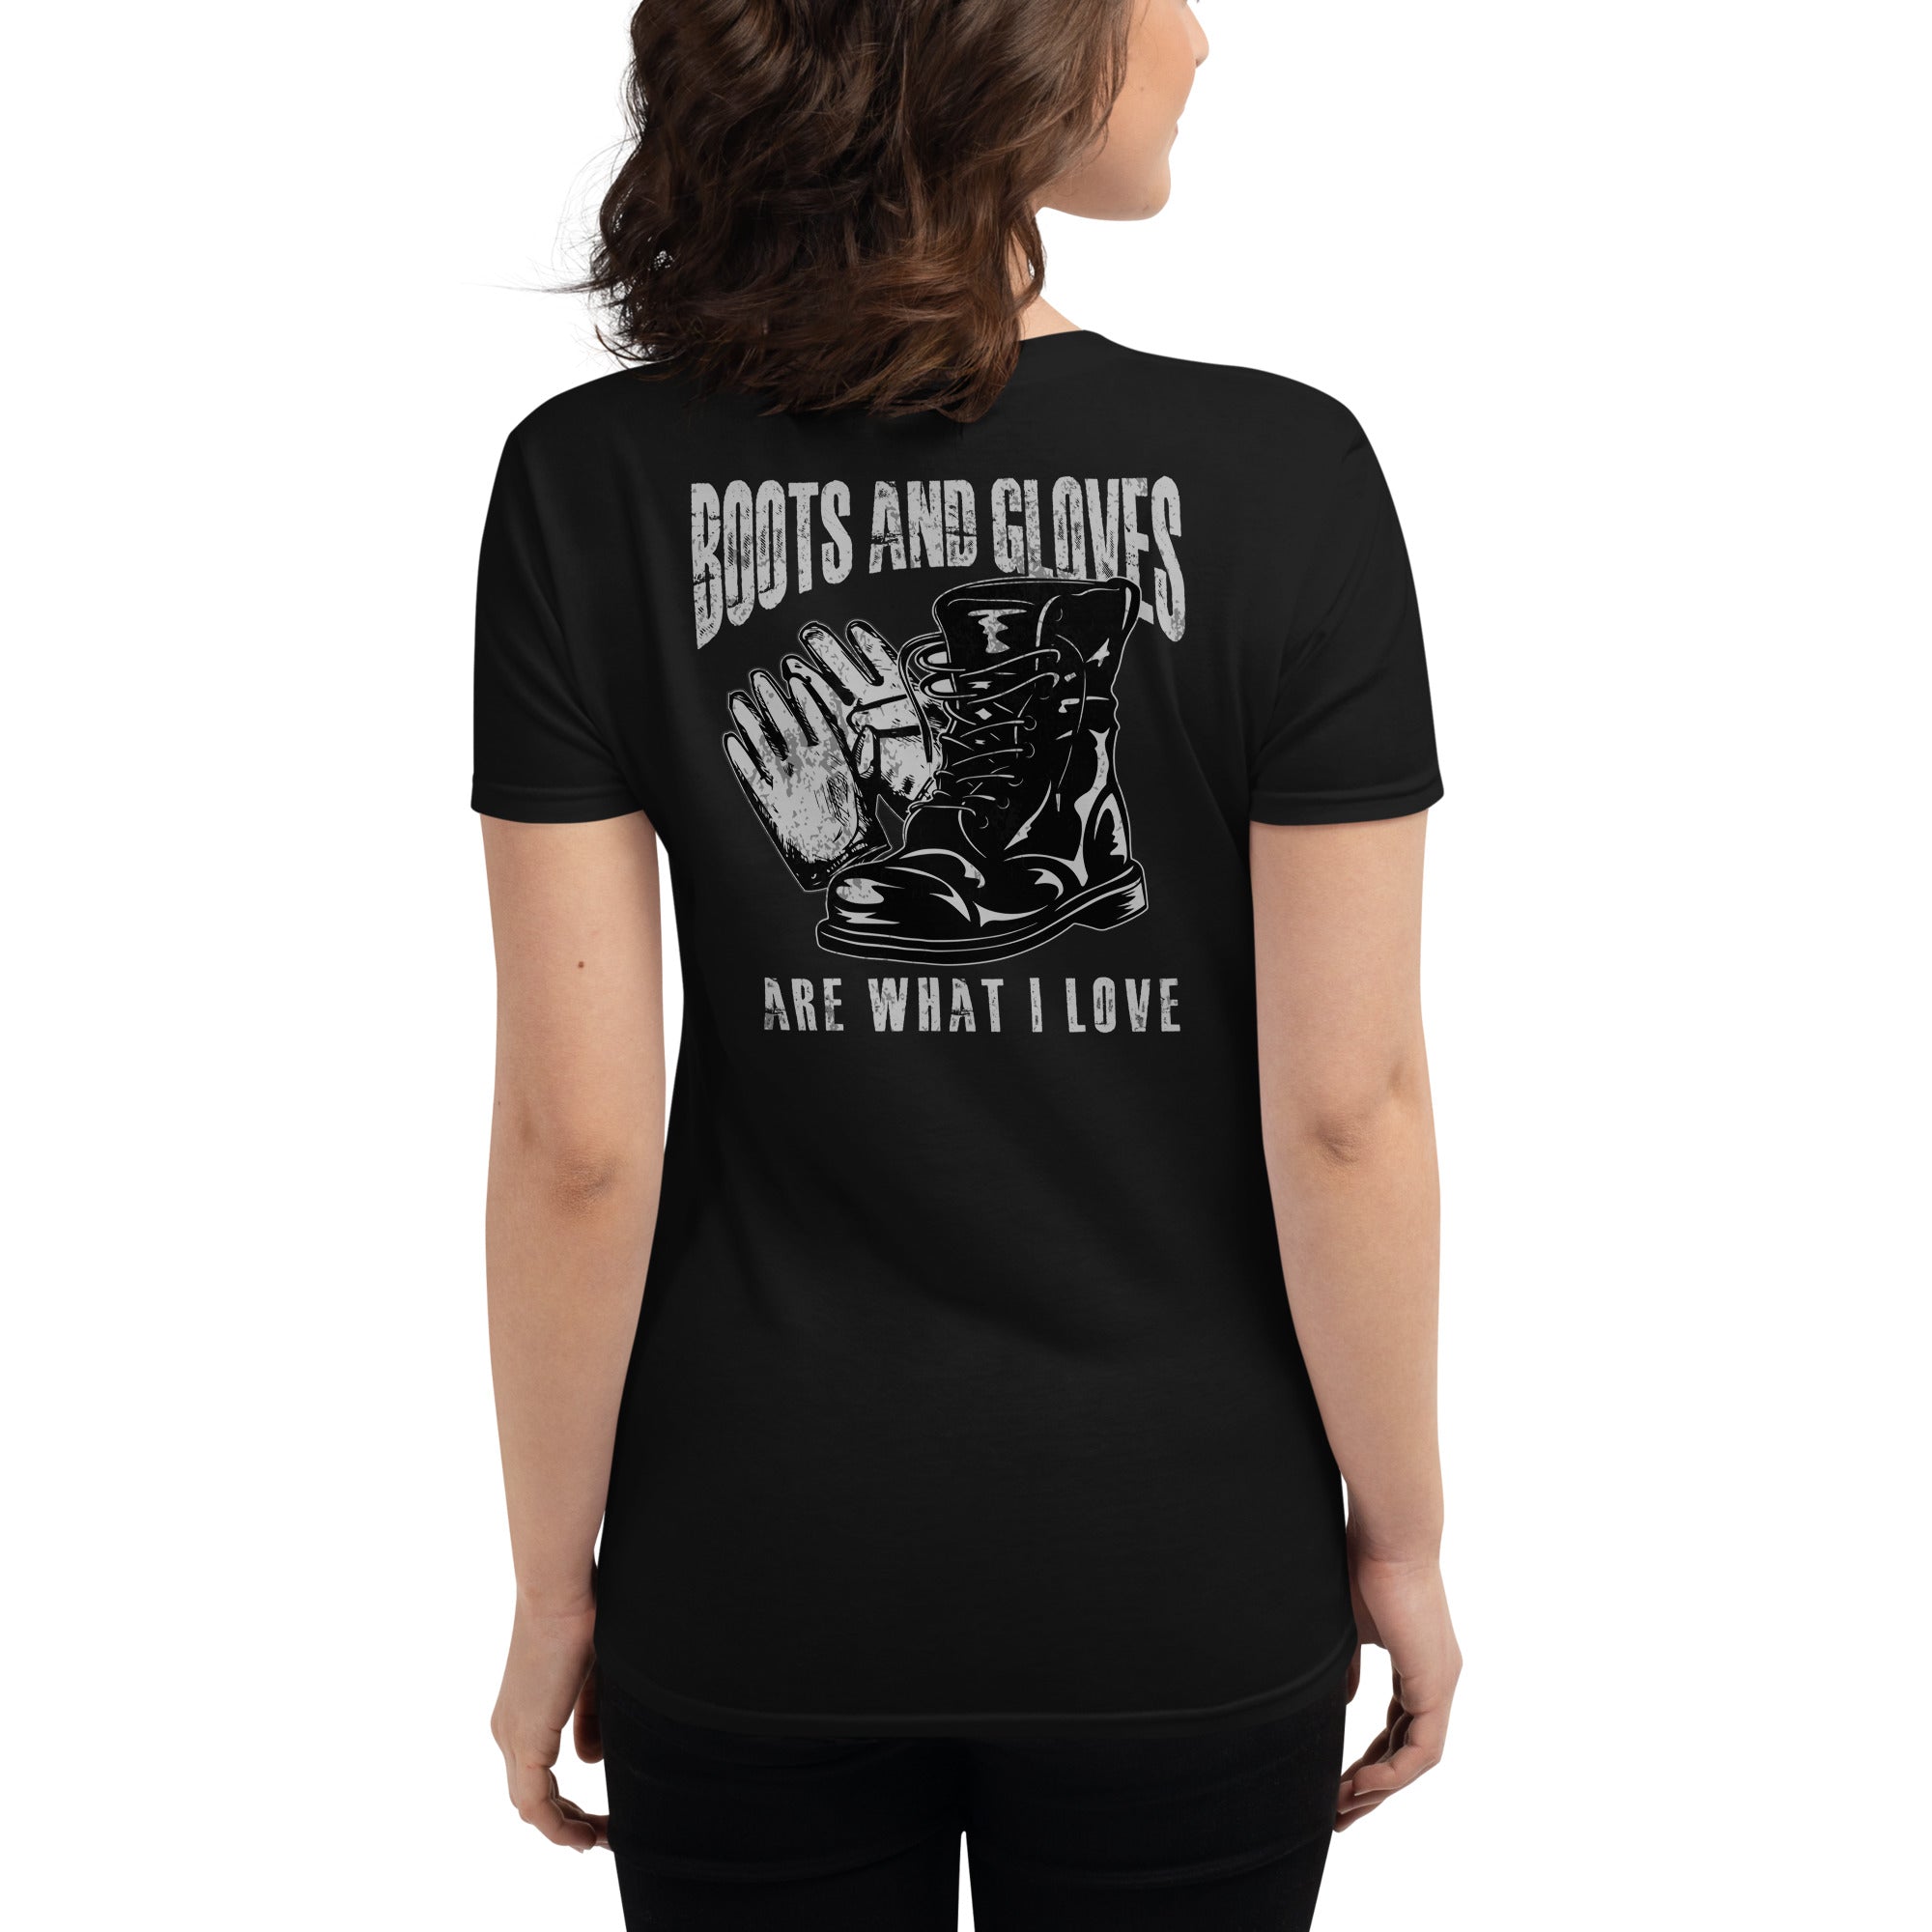 Boots and Gloves are what I Love  I  Women's short sleeve t-shirt